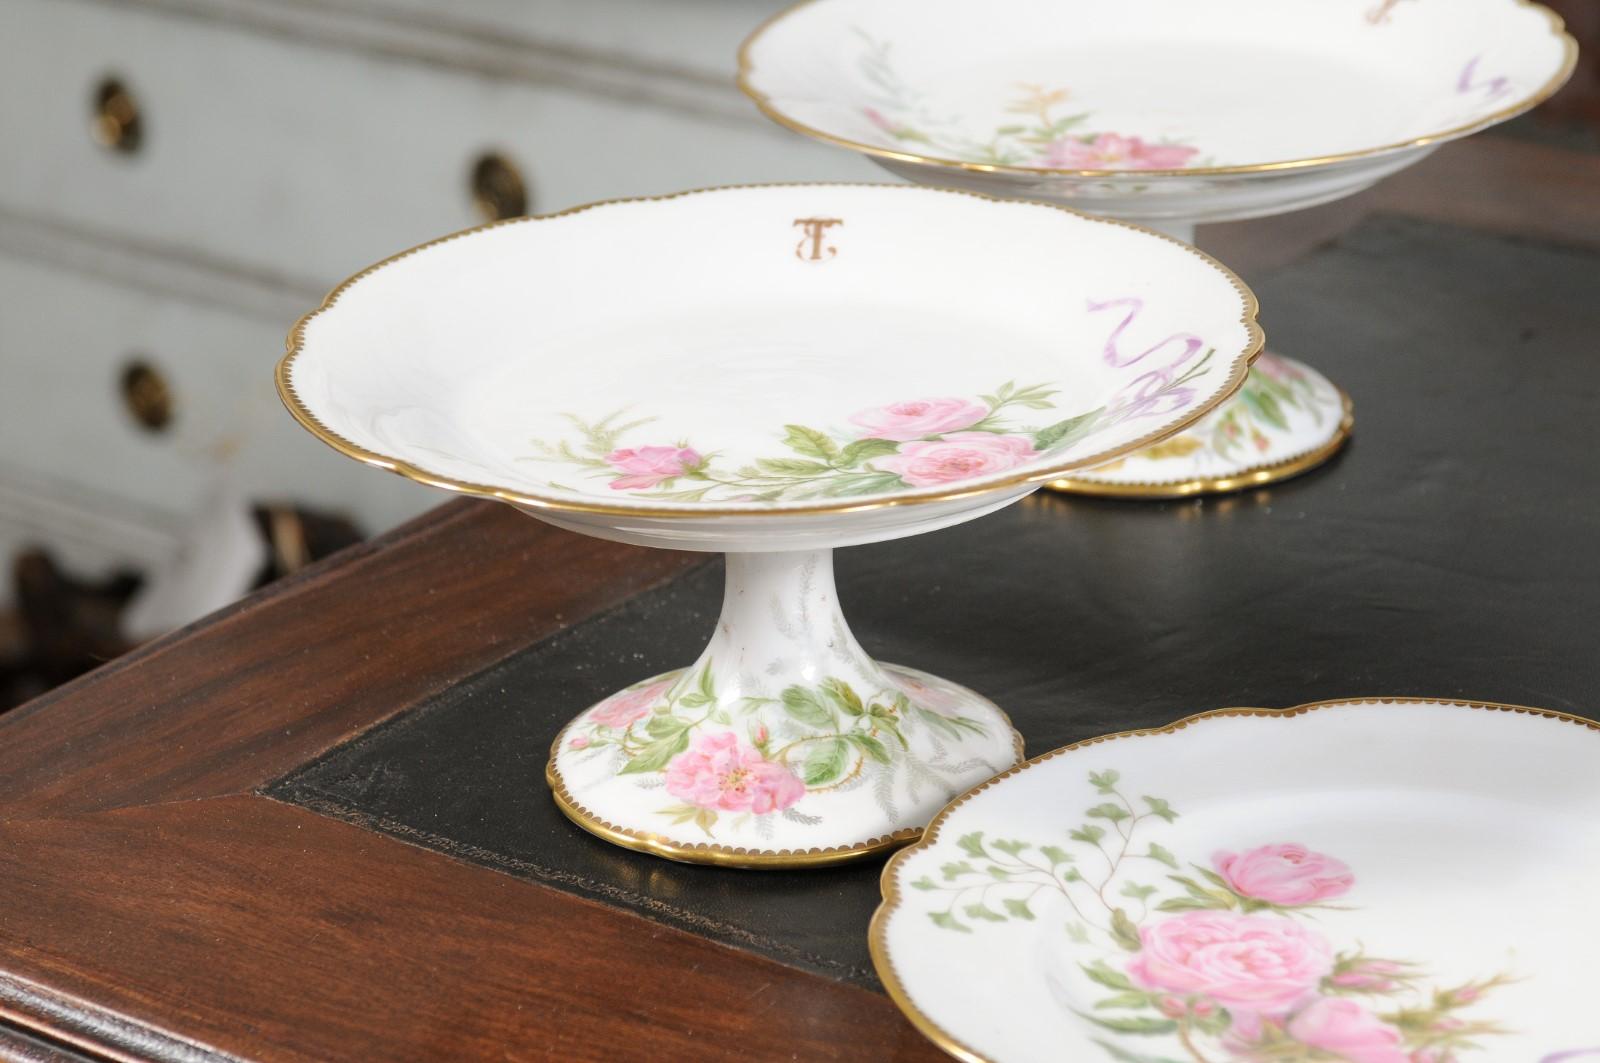 English Porcelain Compotes and Plates with Floral Décor and Gilt Trim For Sale 4